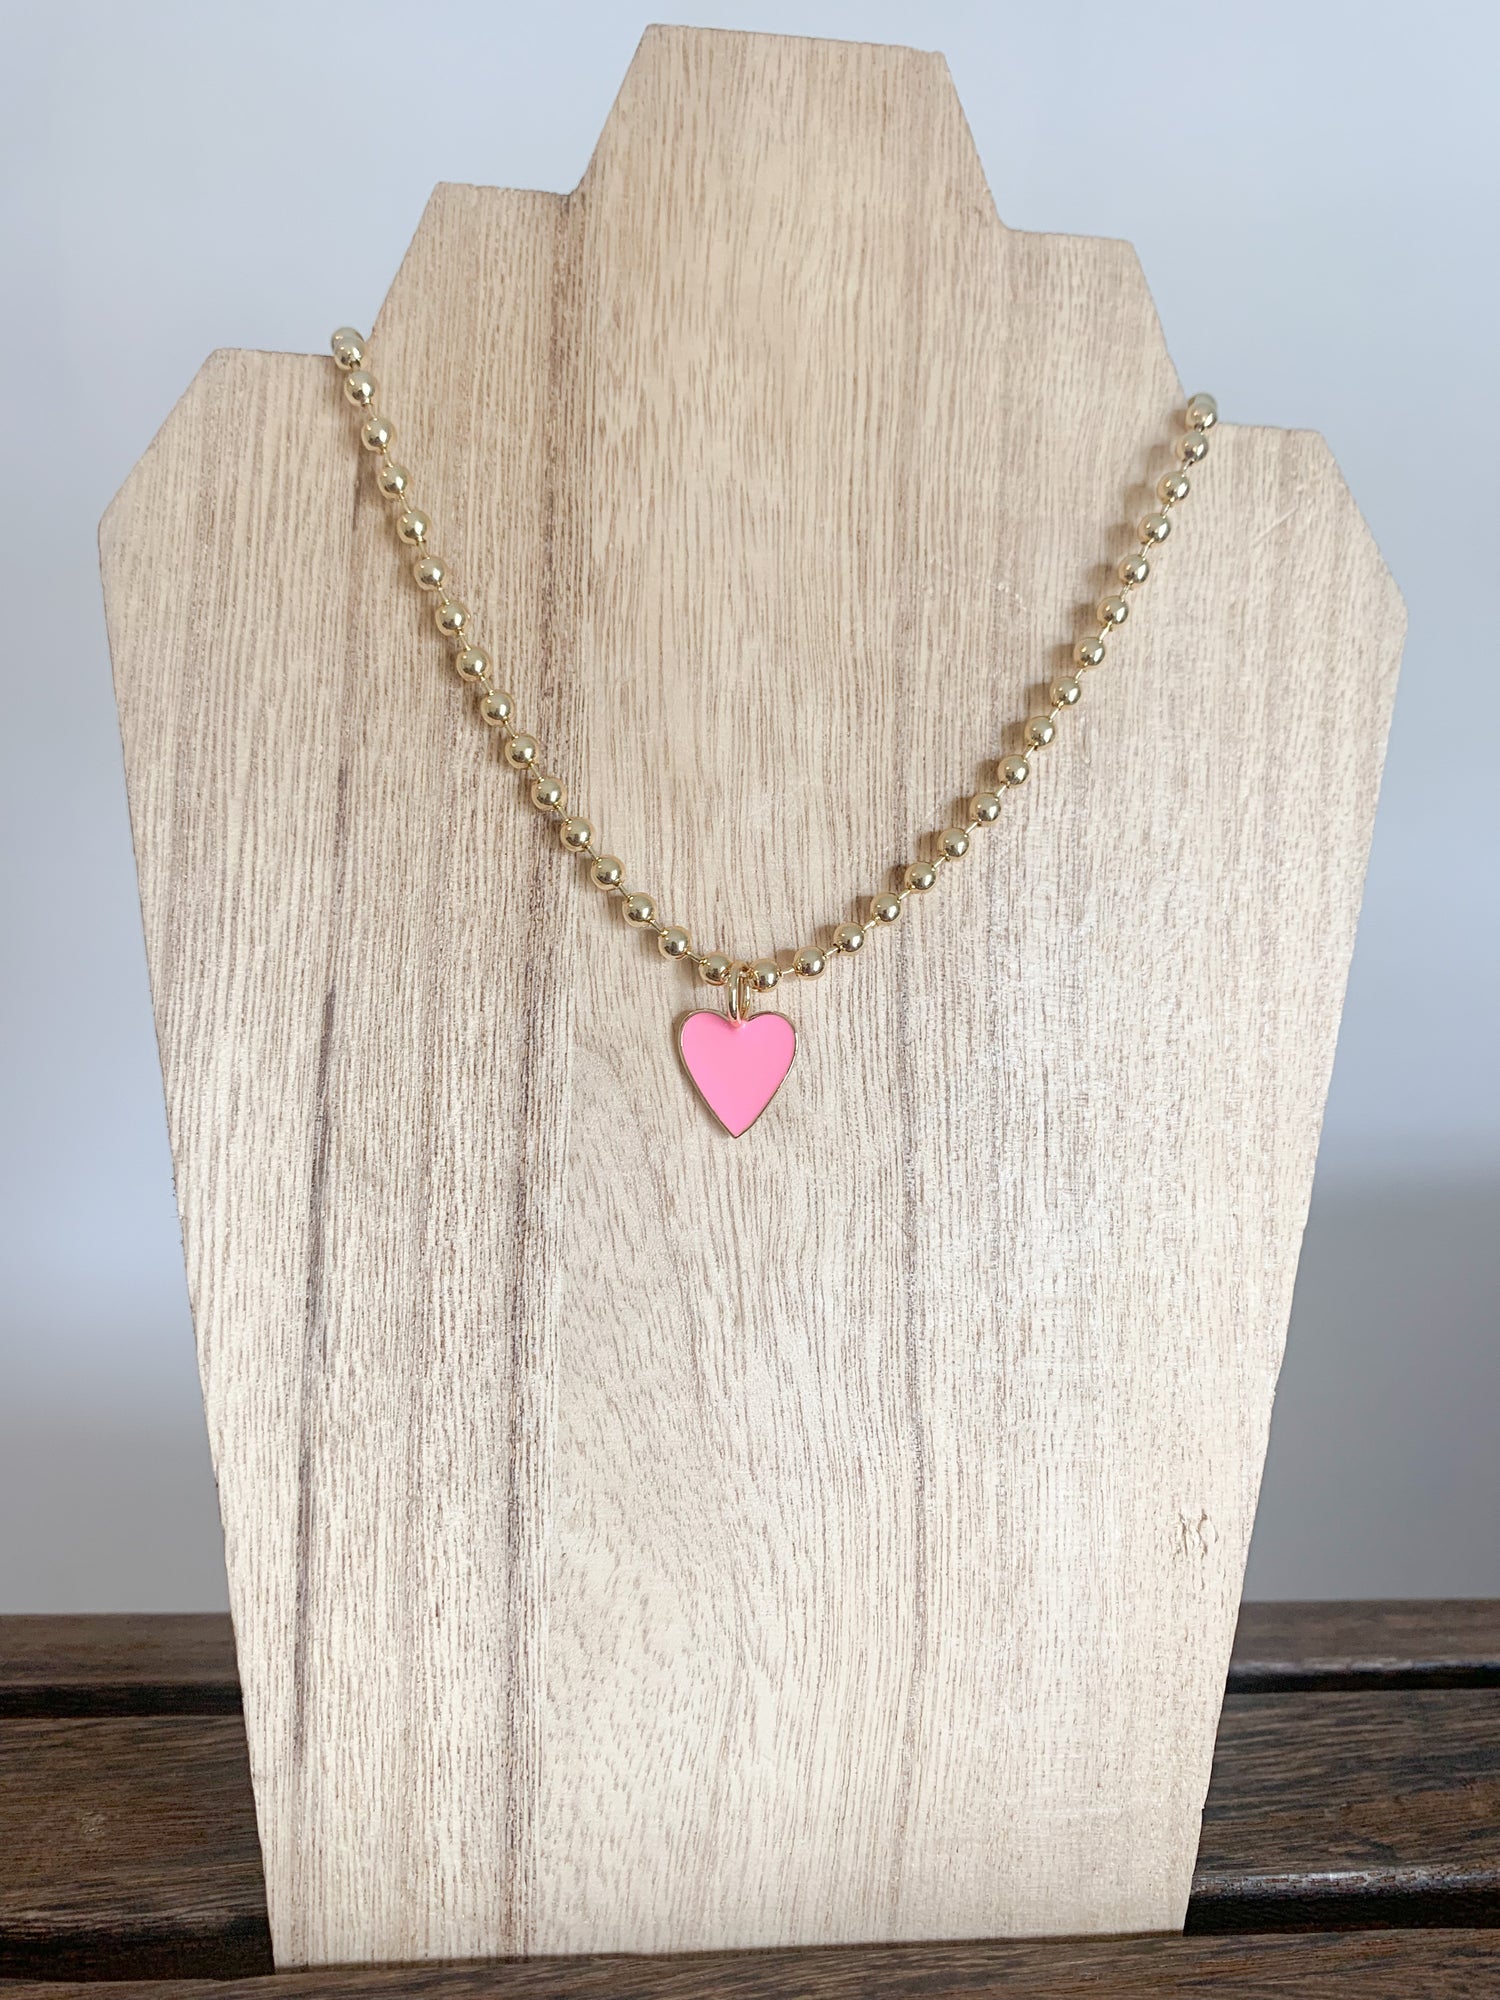 18 Karat Gold Plated Beaded Necklace with Enamel Heart Pendant on a 18 inch adjustable chain.